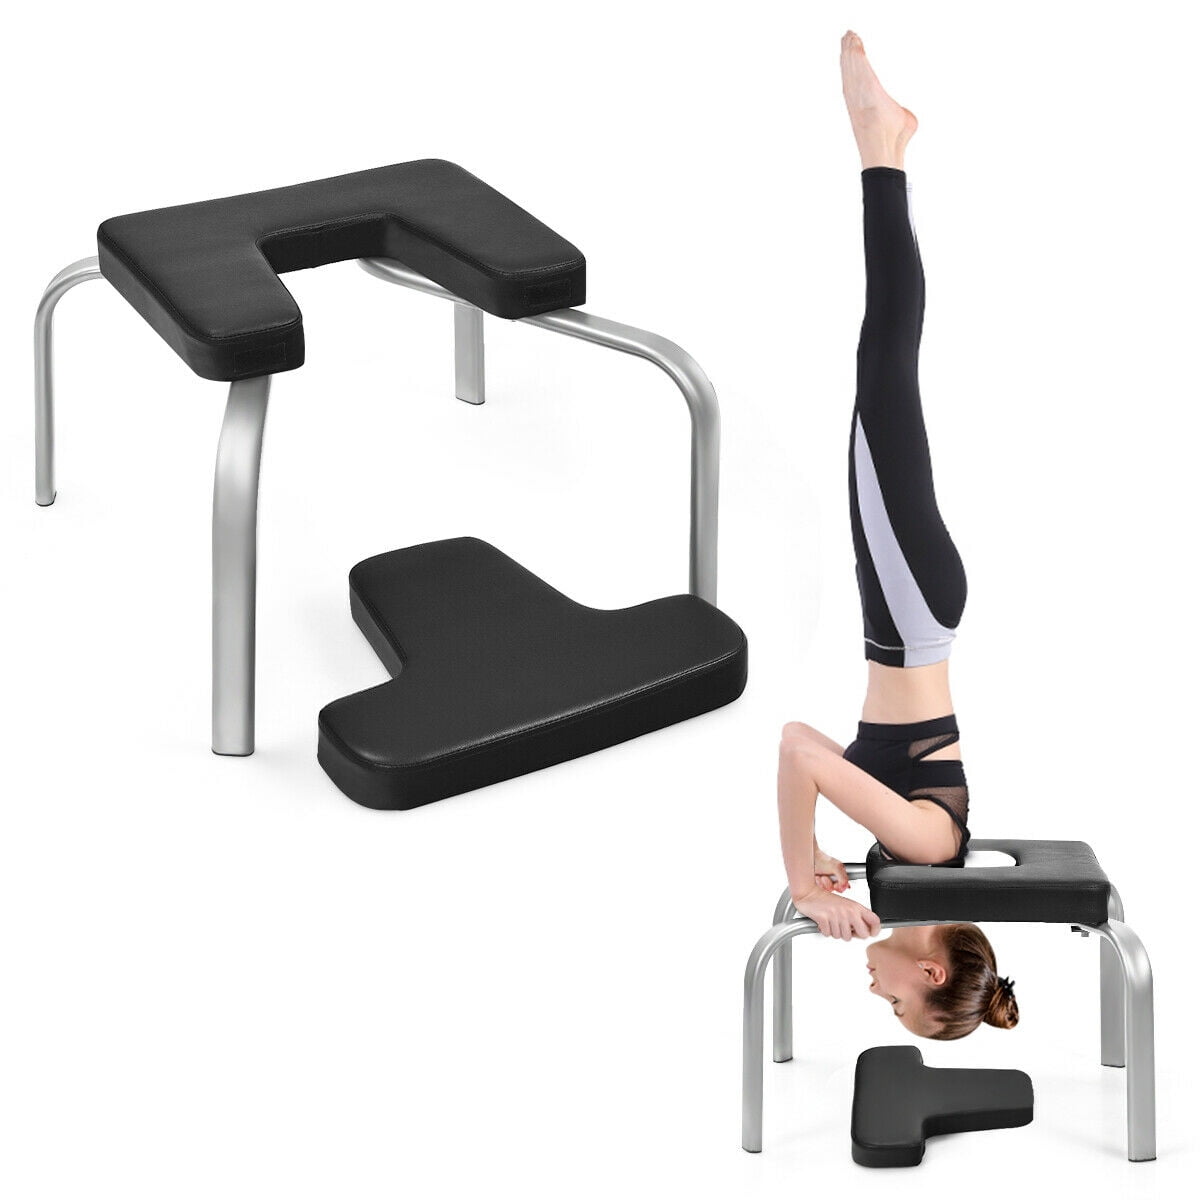 Yoga Inversion Chair Yoga Headstand Bench Steel Frame & PU Pads Non-slip Black 